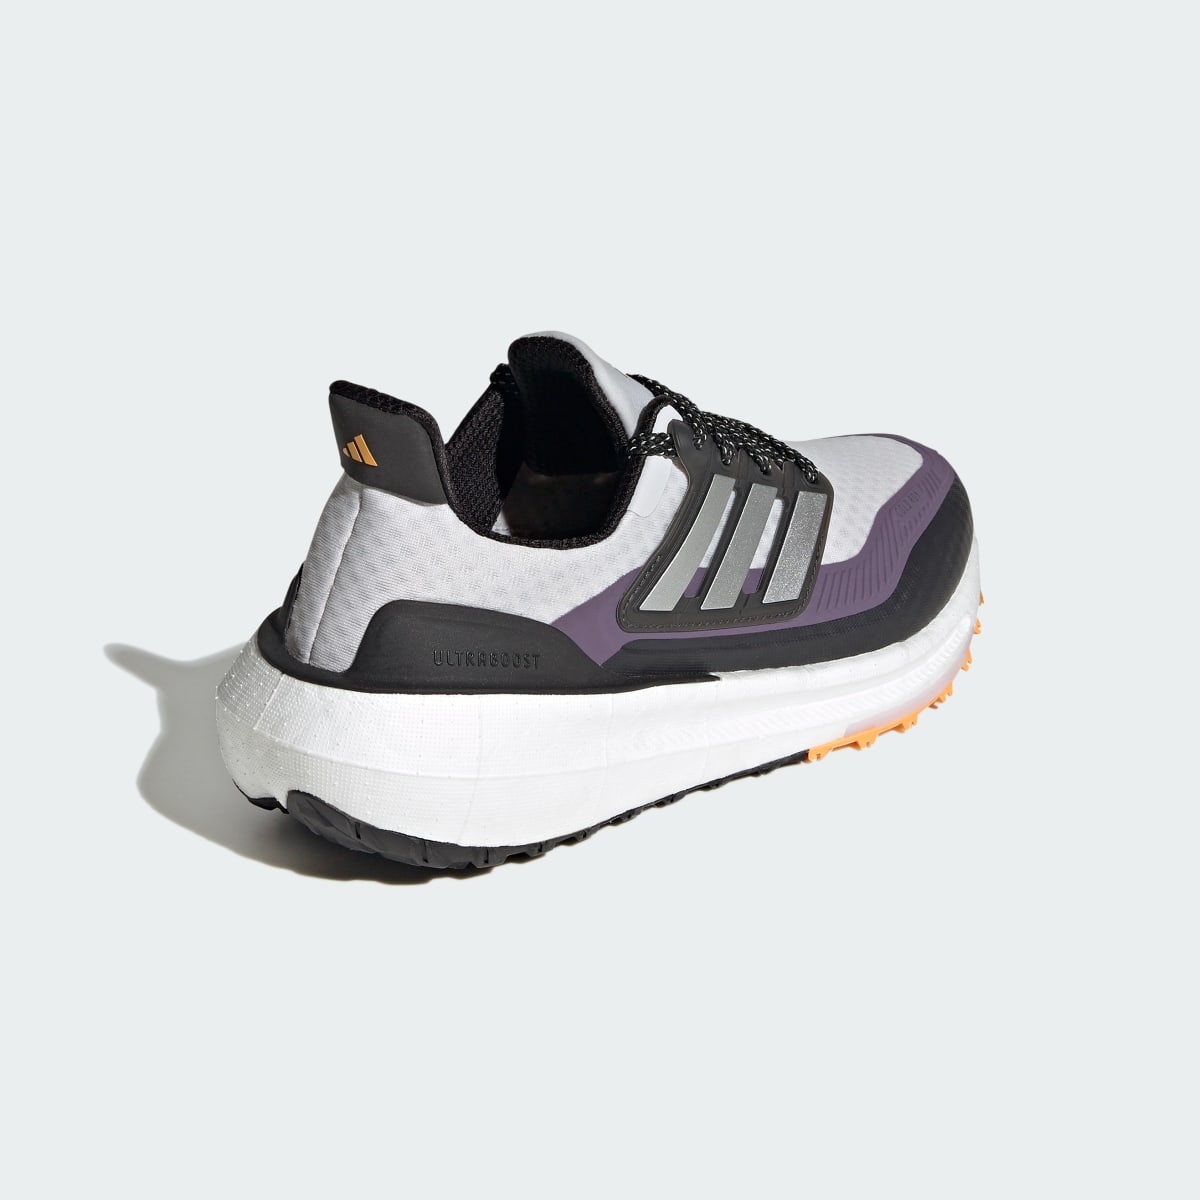 Adidas Ultraboost Light COLD.RDY 2.0 Shoes. 6